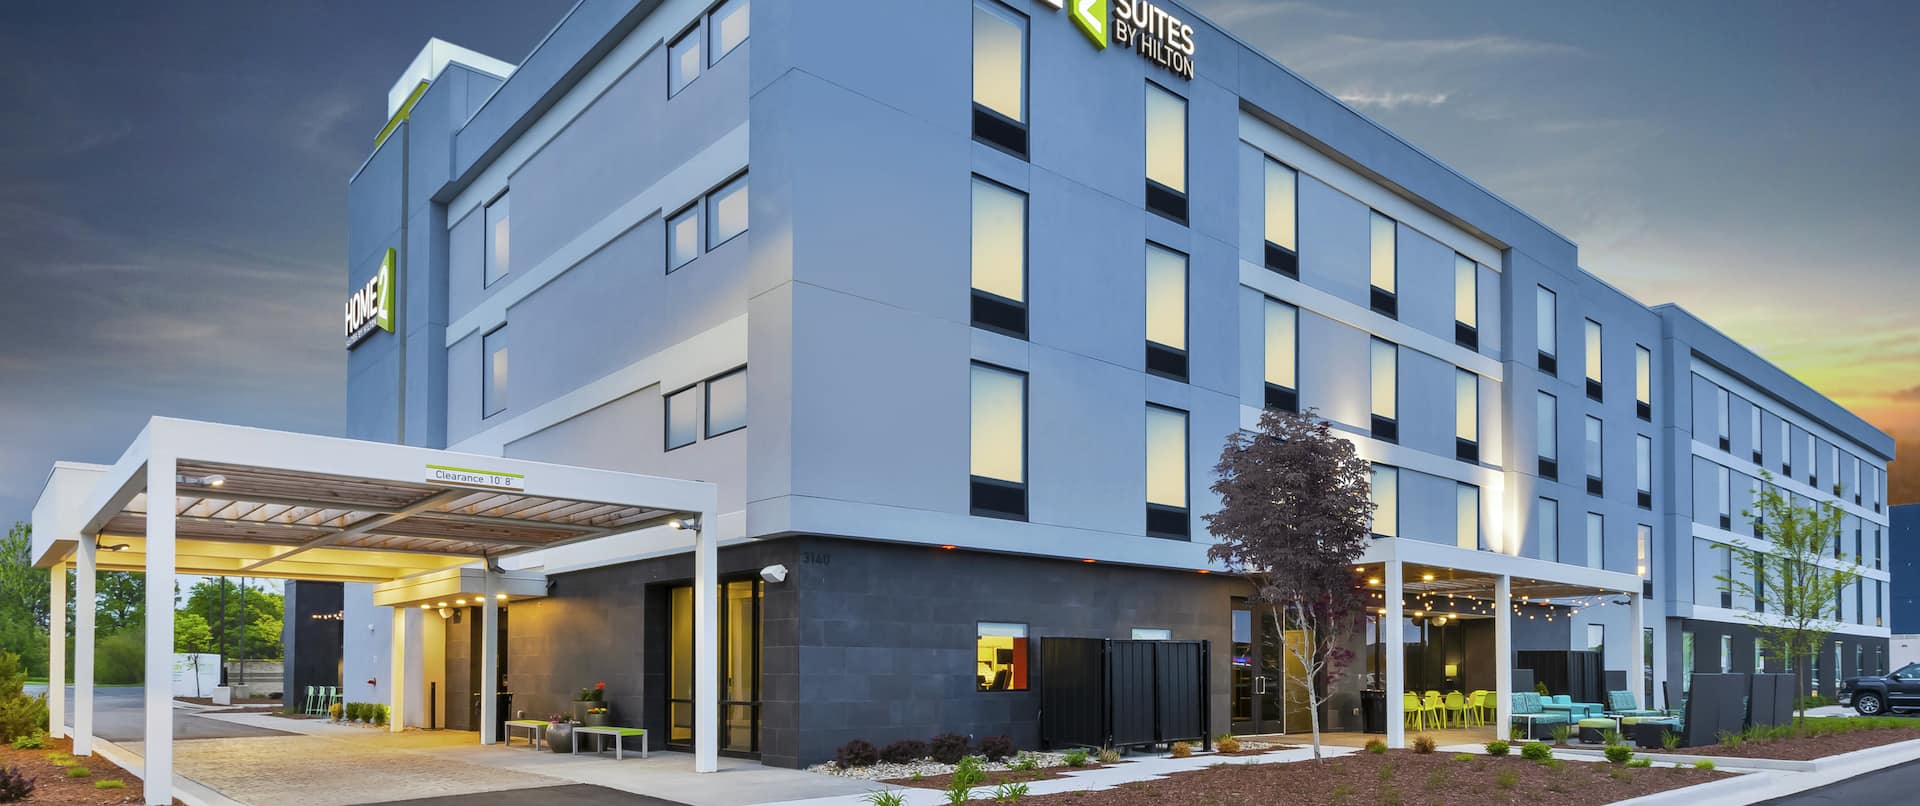 Home2 Suites Hotel Exterior at Night